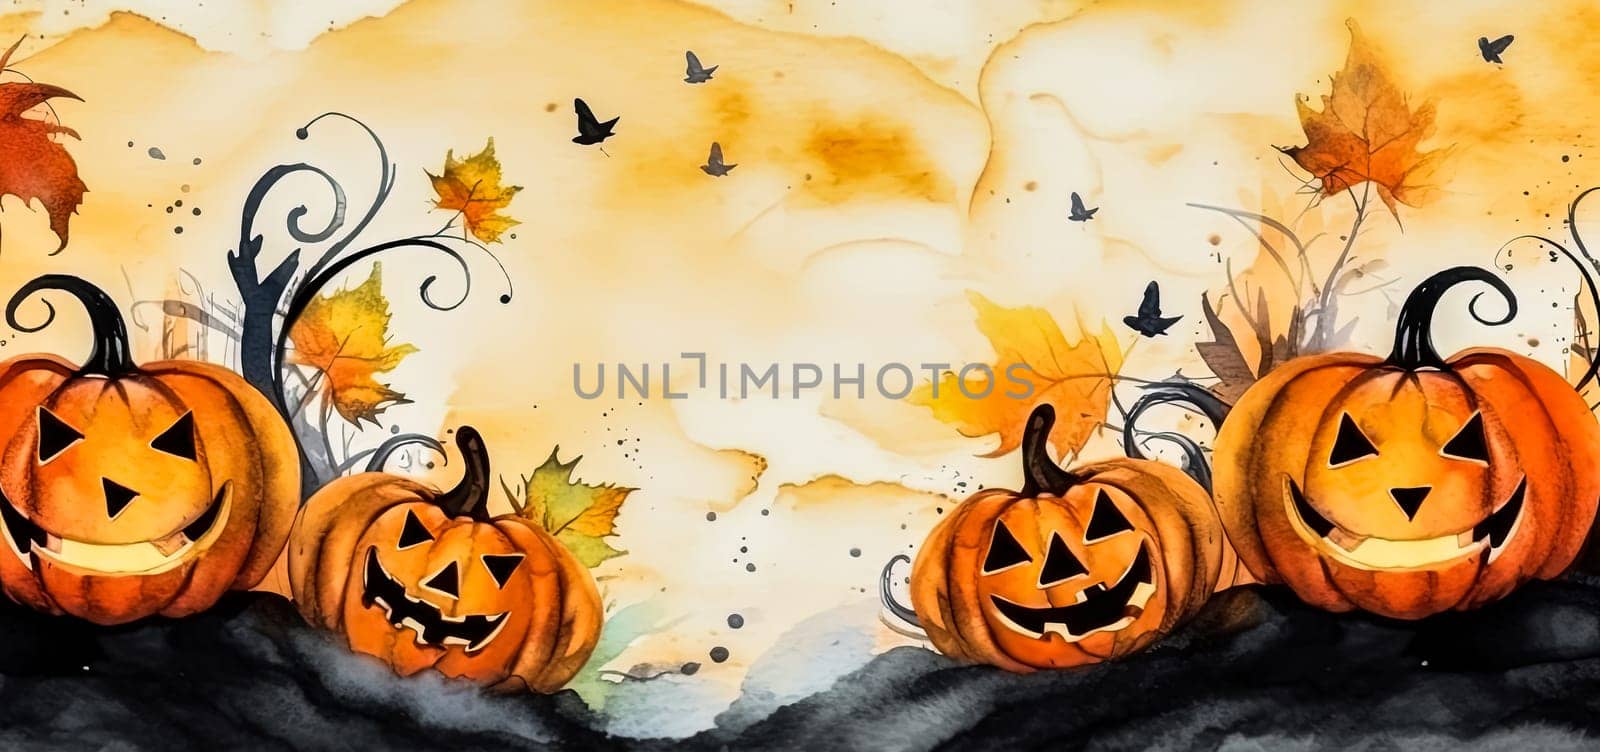 A painting of pumpkins with a spooky Halloween theme. The pumpkins are smiling and have their eyes open, creating a fun and festive atmosphere